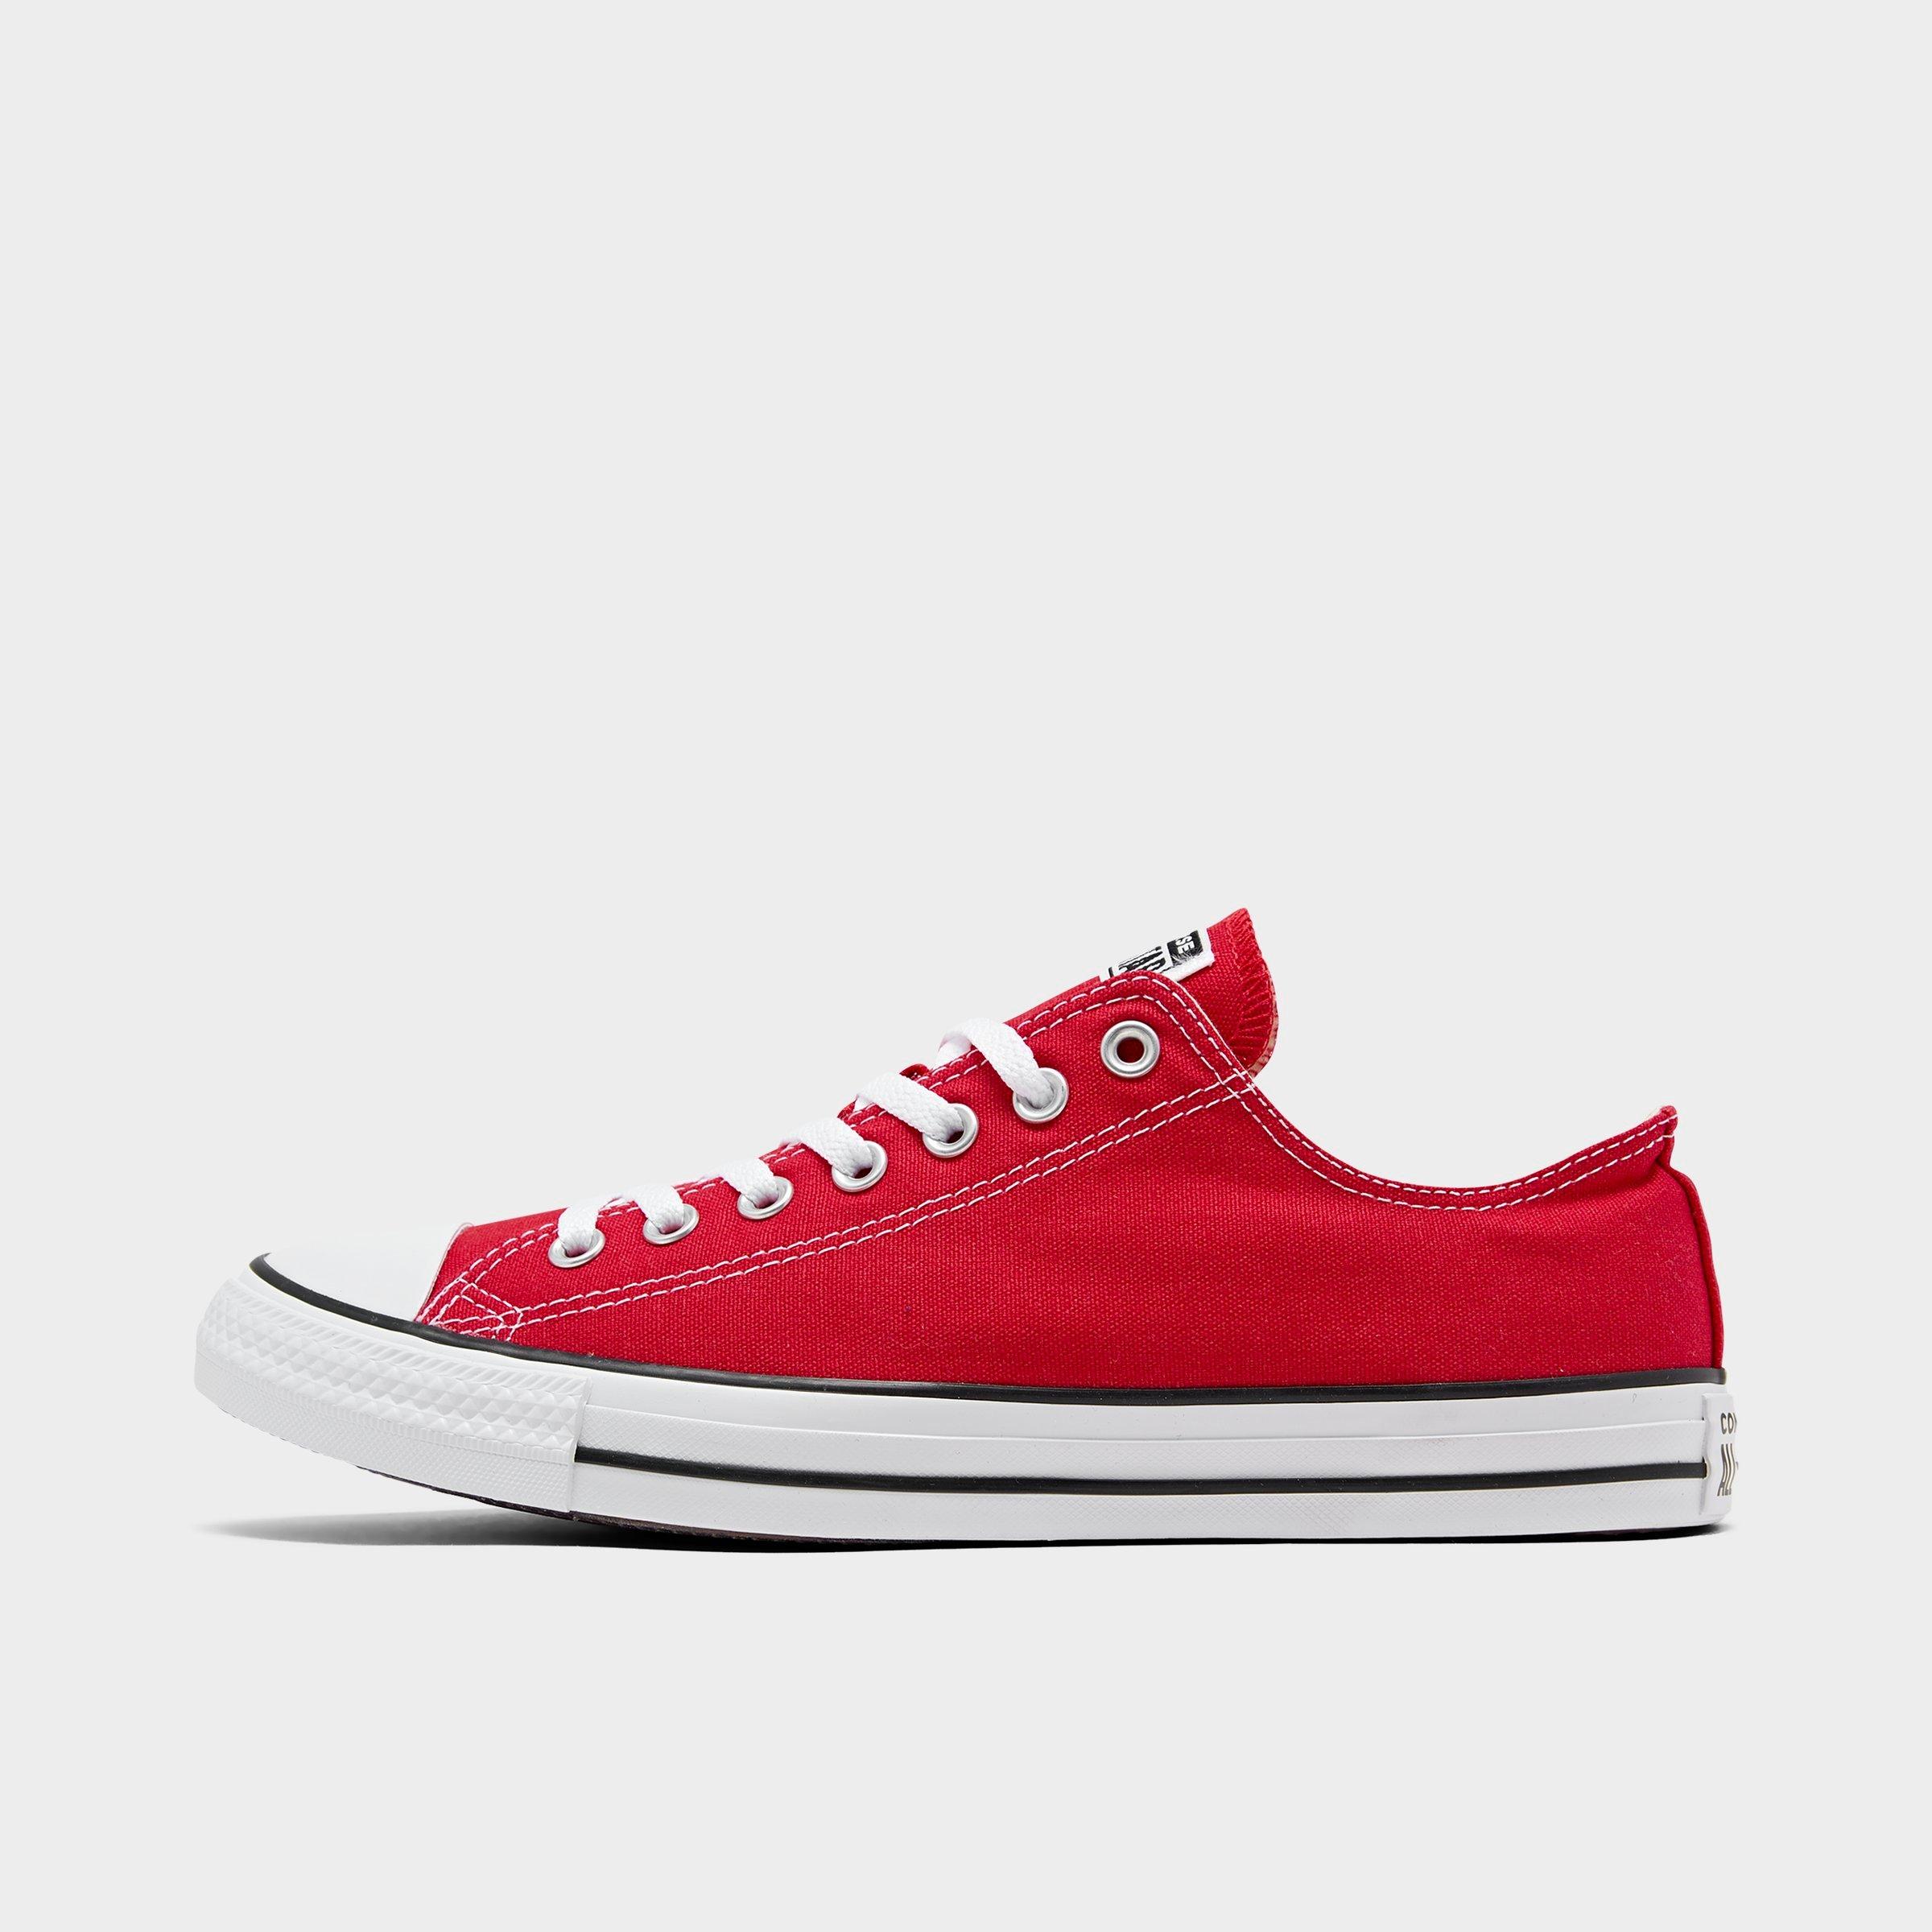 converse chuck taylor all star low top unisex shoe $50